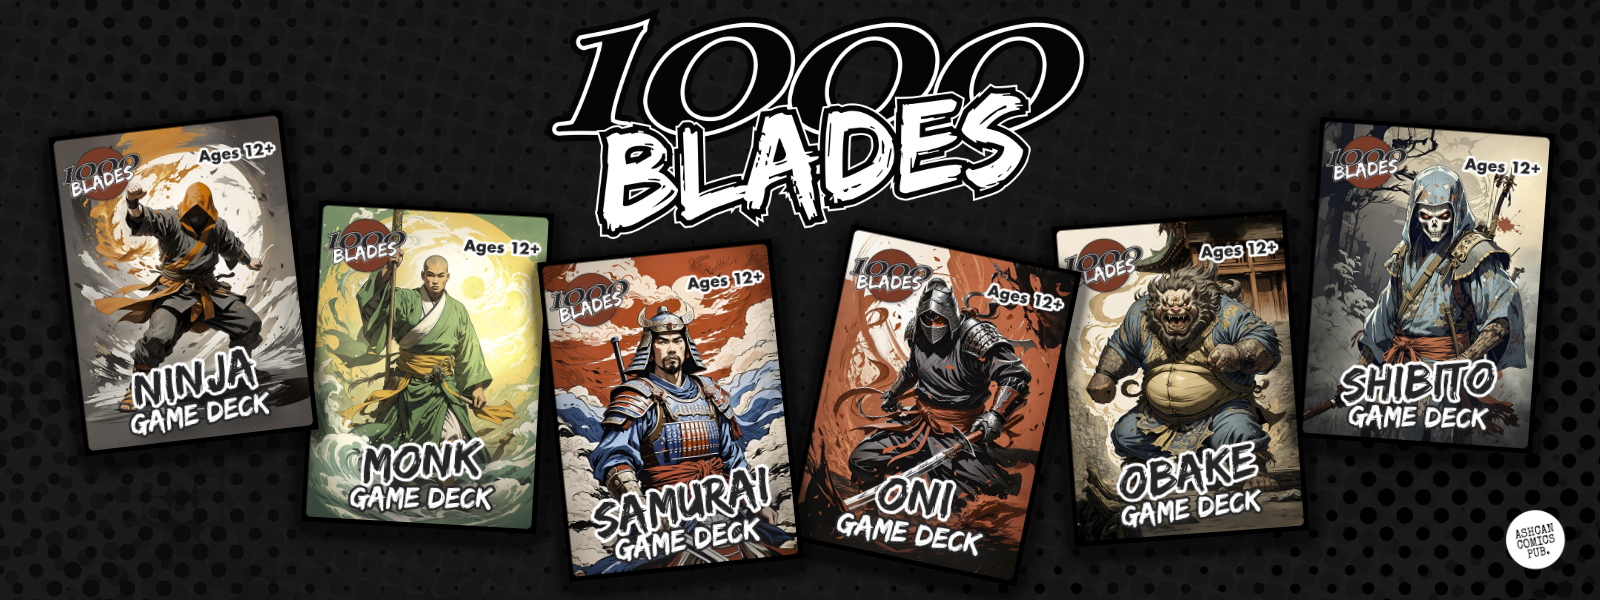 Opening picture of the 1000 Blades information page.